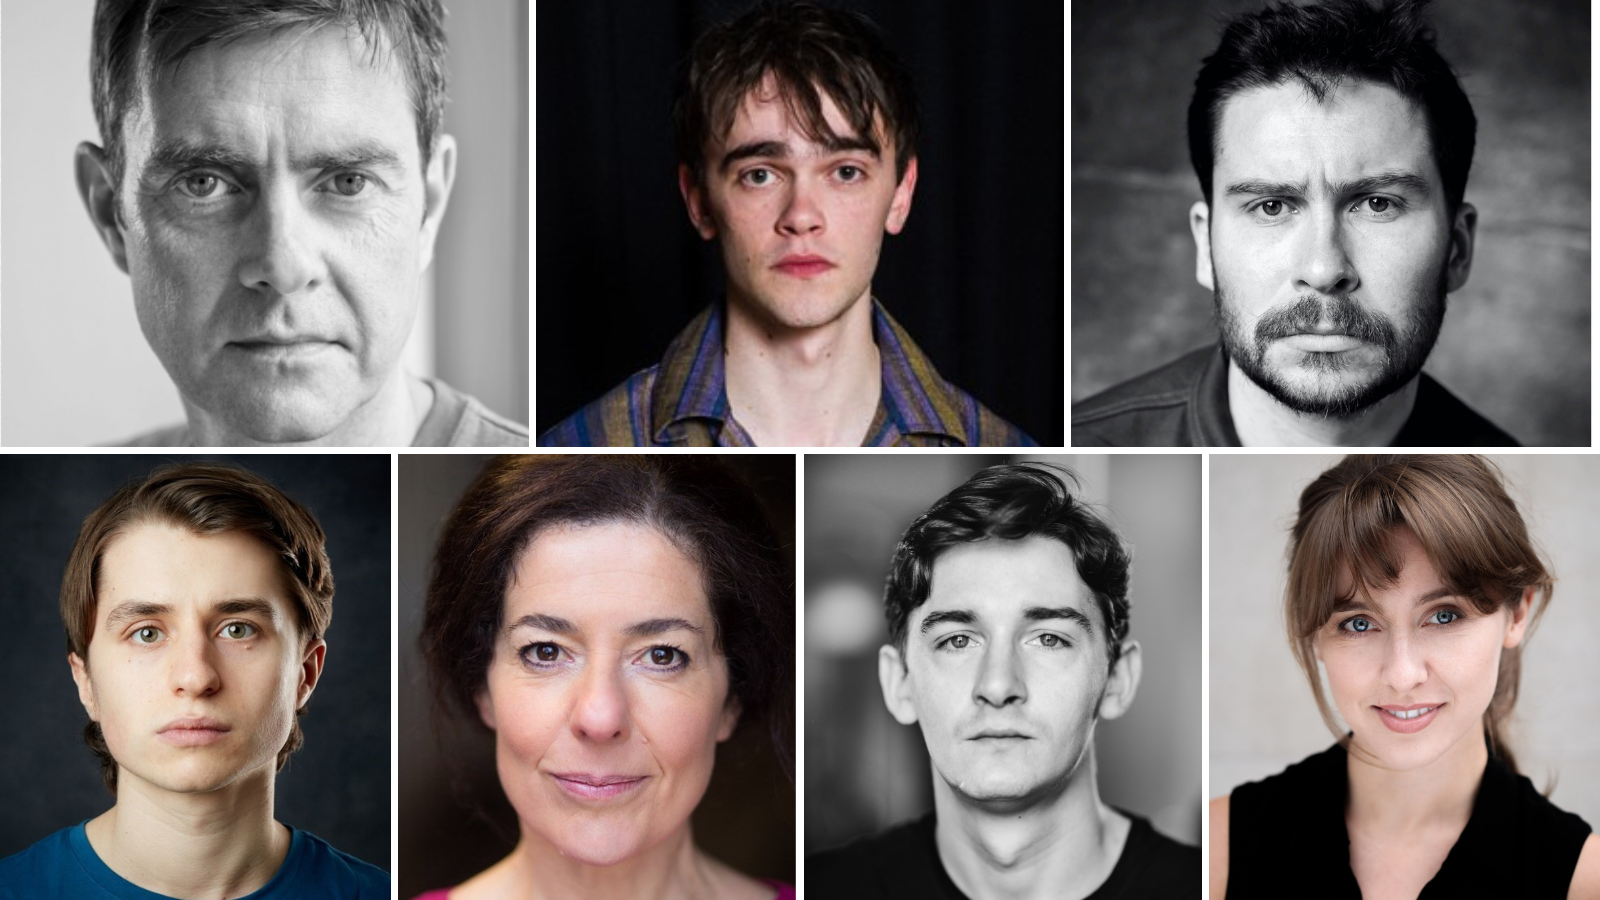 A composite image of seven headshots of actors starring in KILL. On the top row there are three images: from left to right is Paul Higgins, Brian Vernel, Daniel Portman and on the bottom row from left to right is Calum Ross, Anita Vettesse, Joanne Thomson, James Harkness.